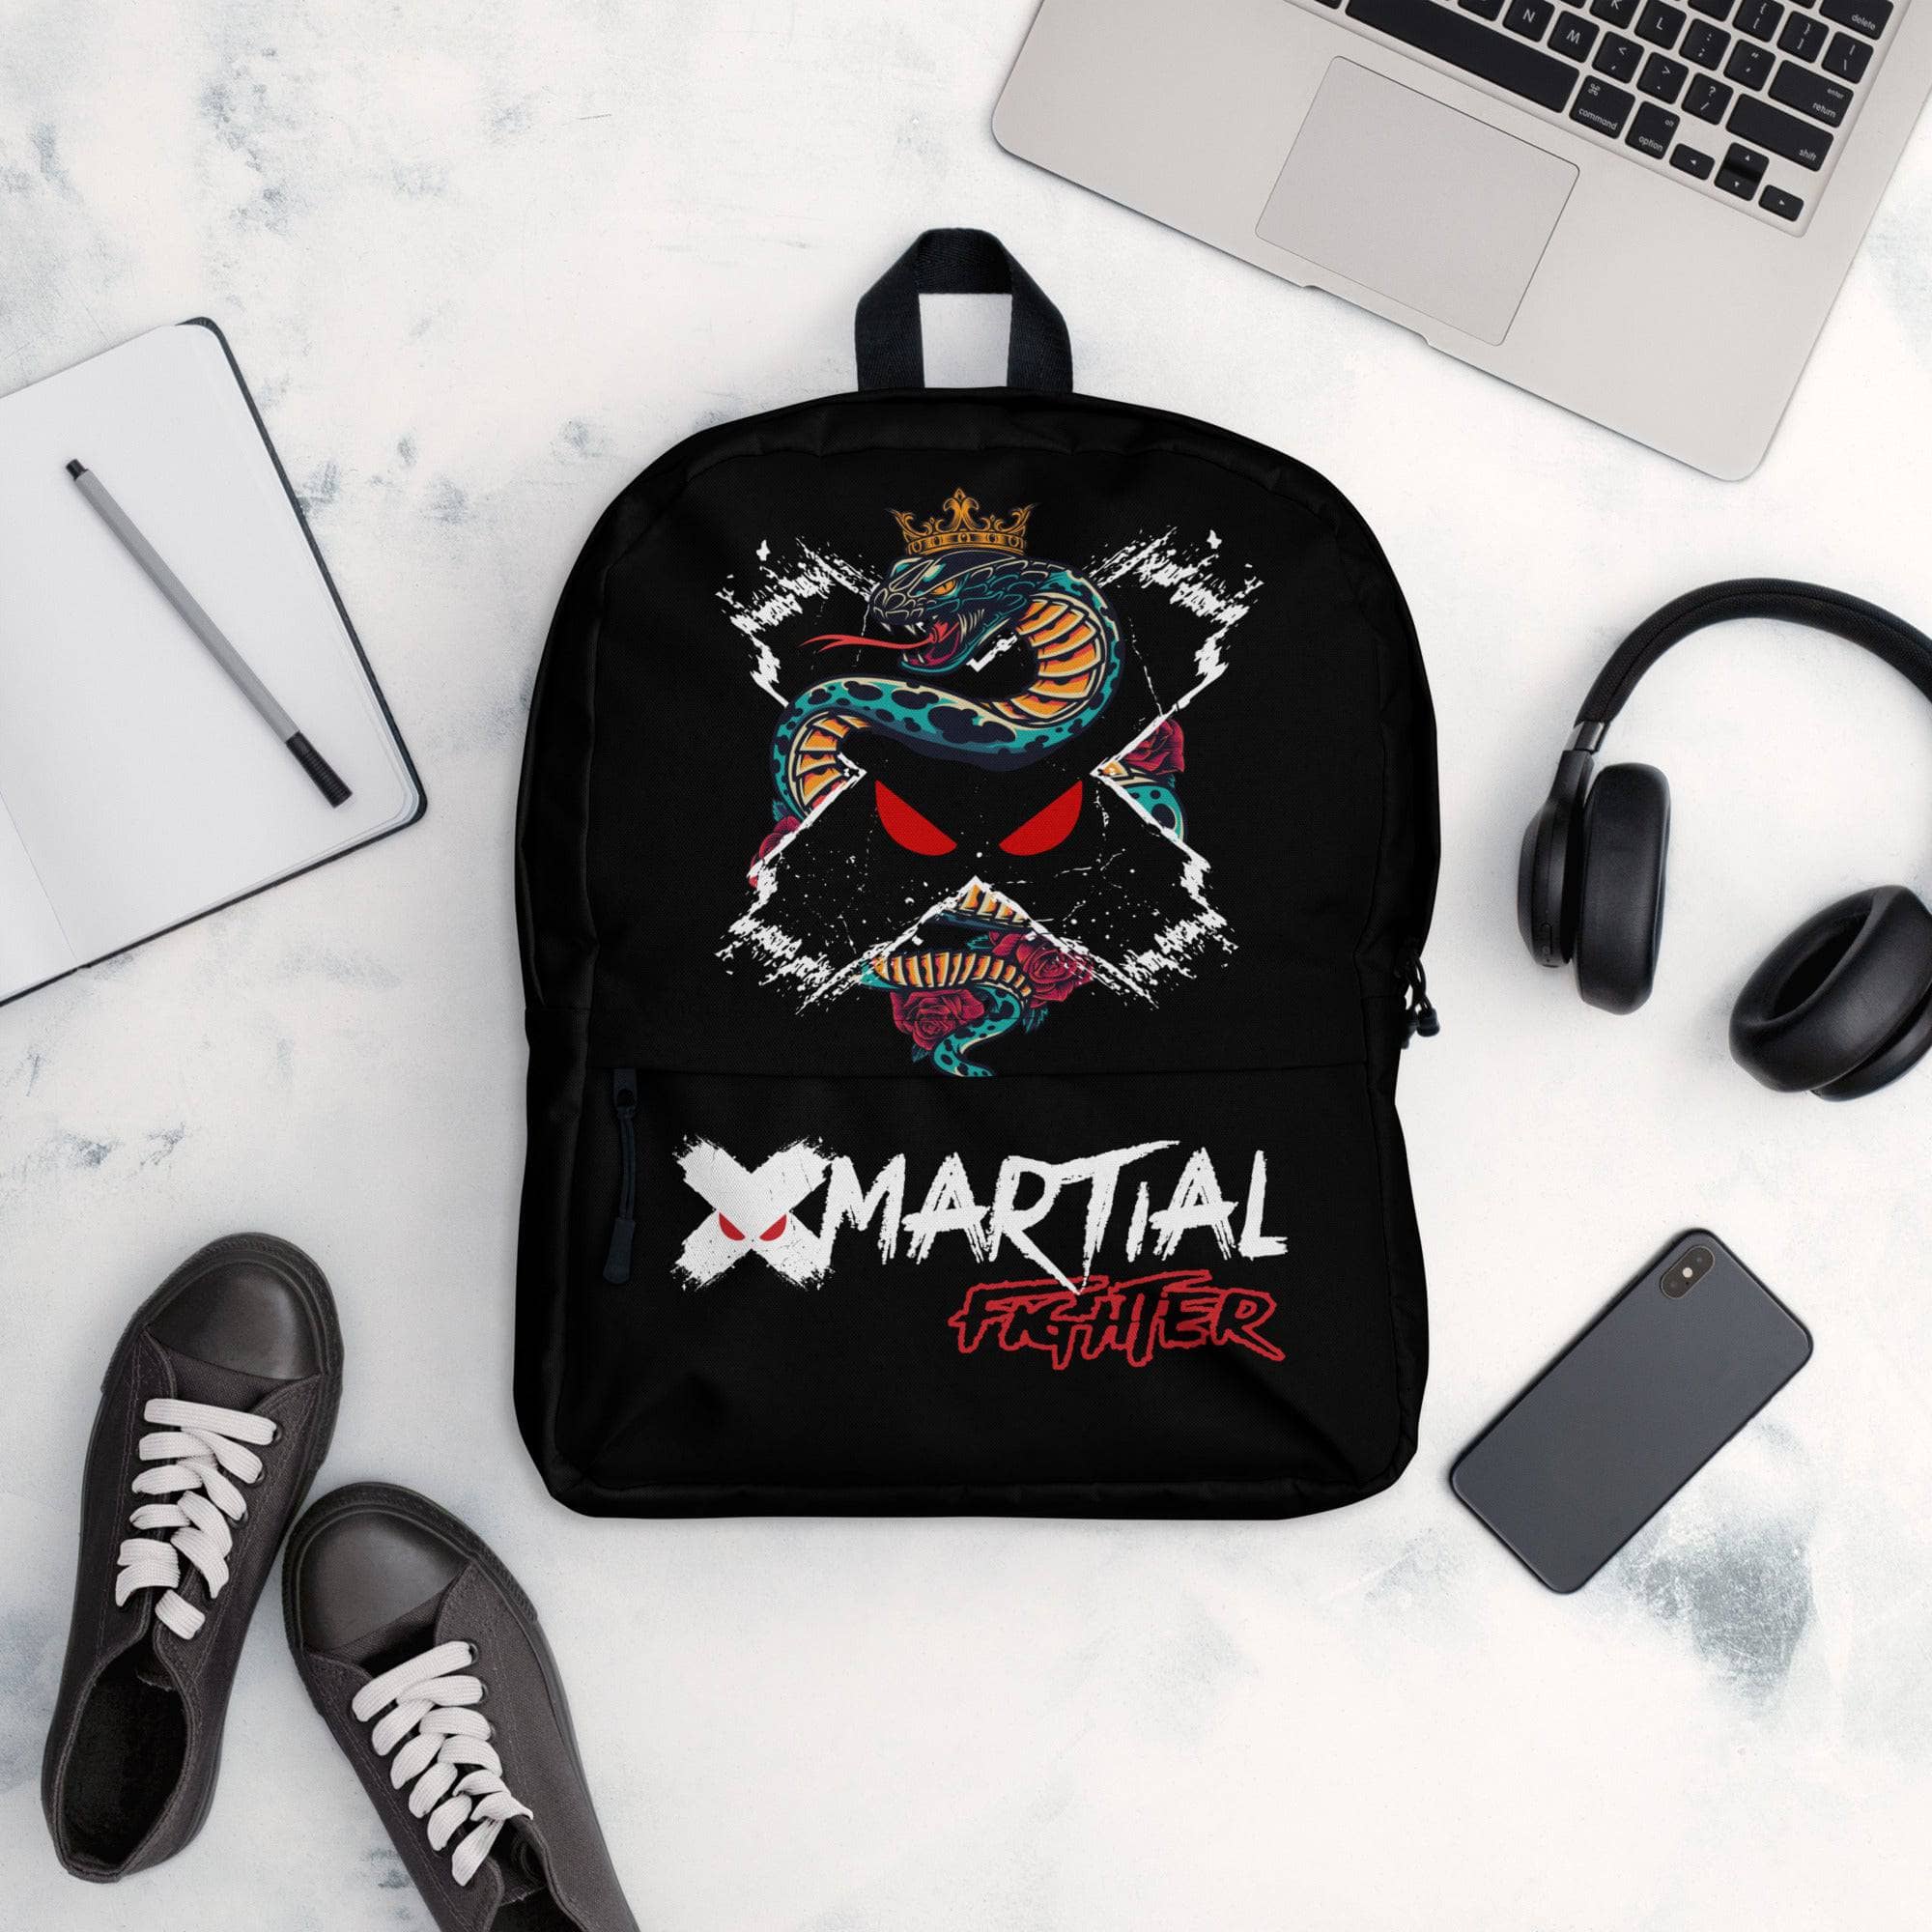 Extreme Backpack XMARTIAL